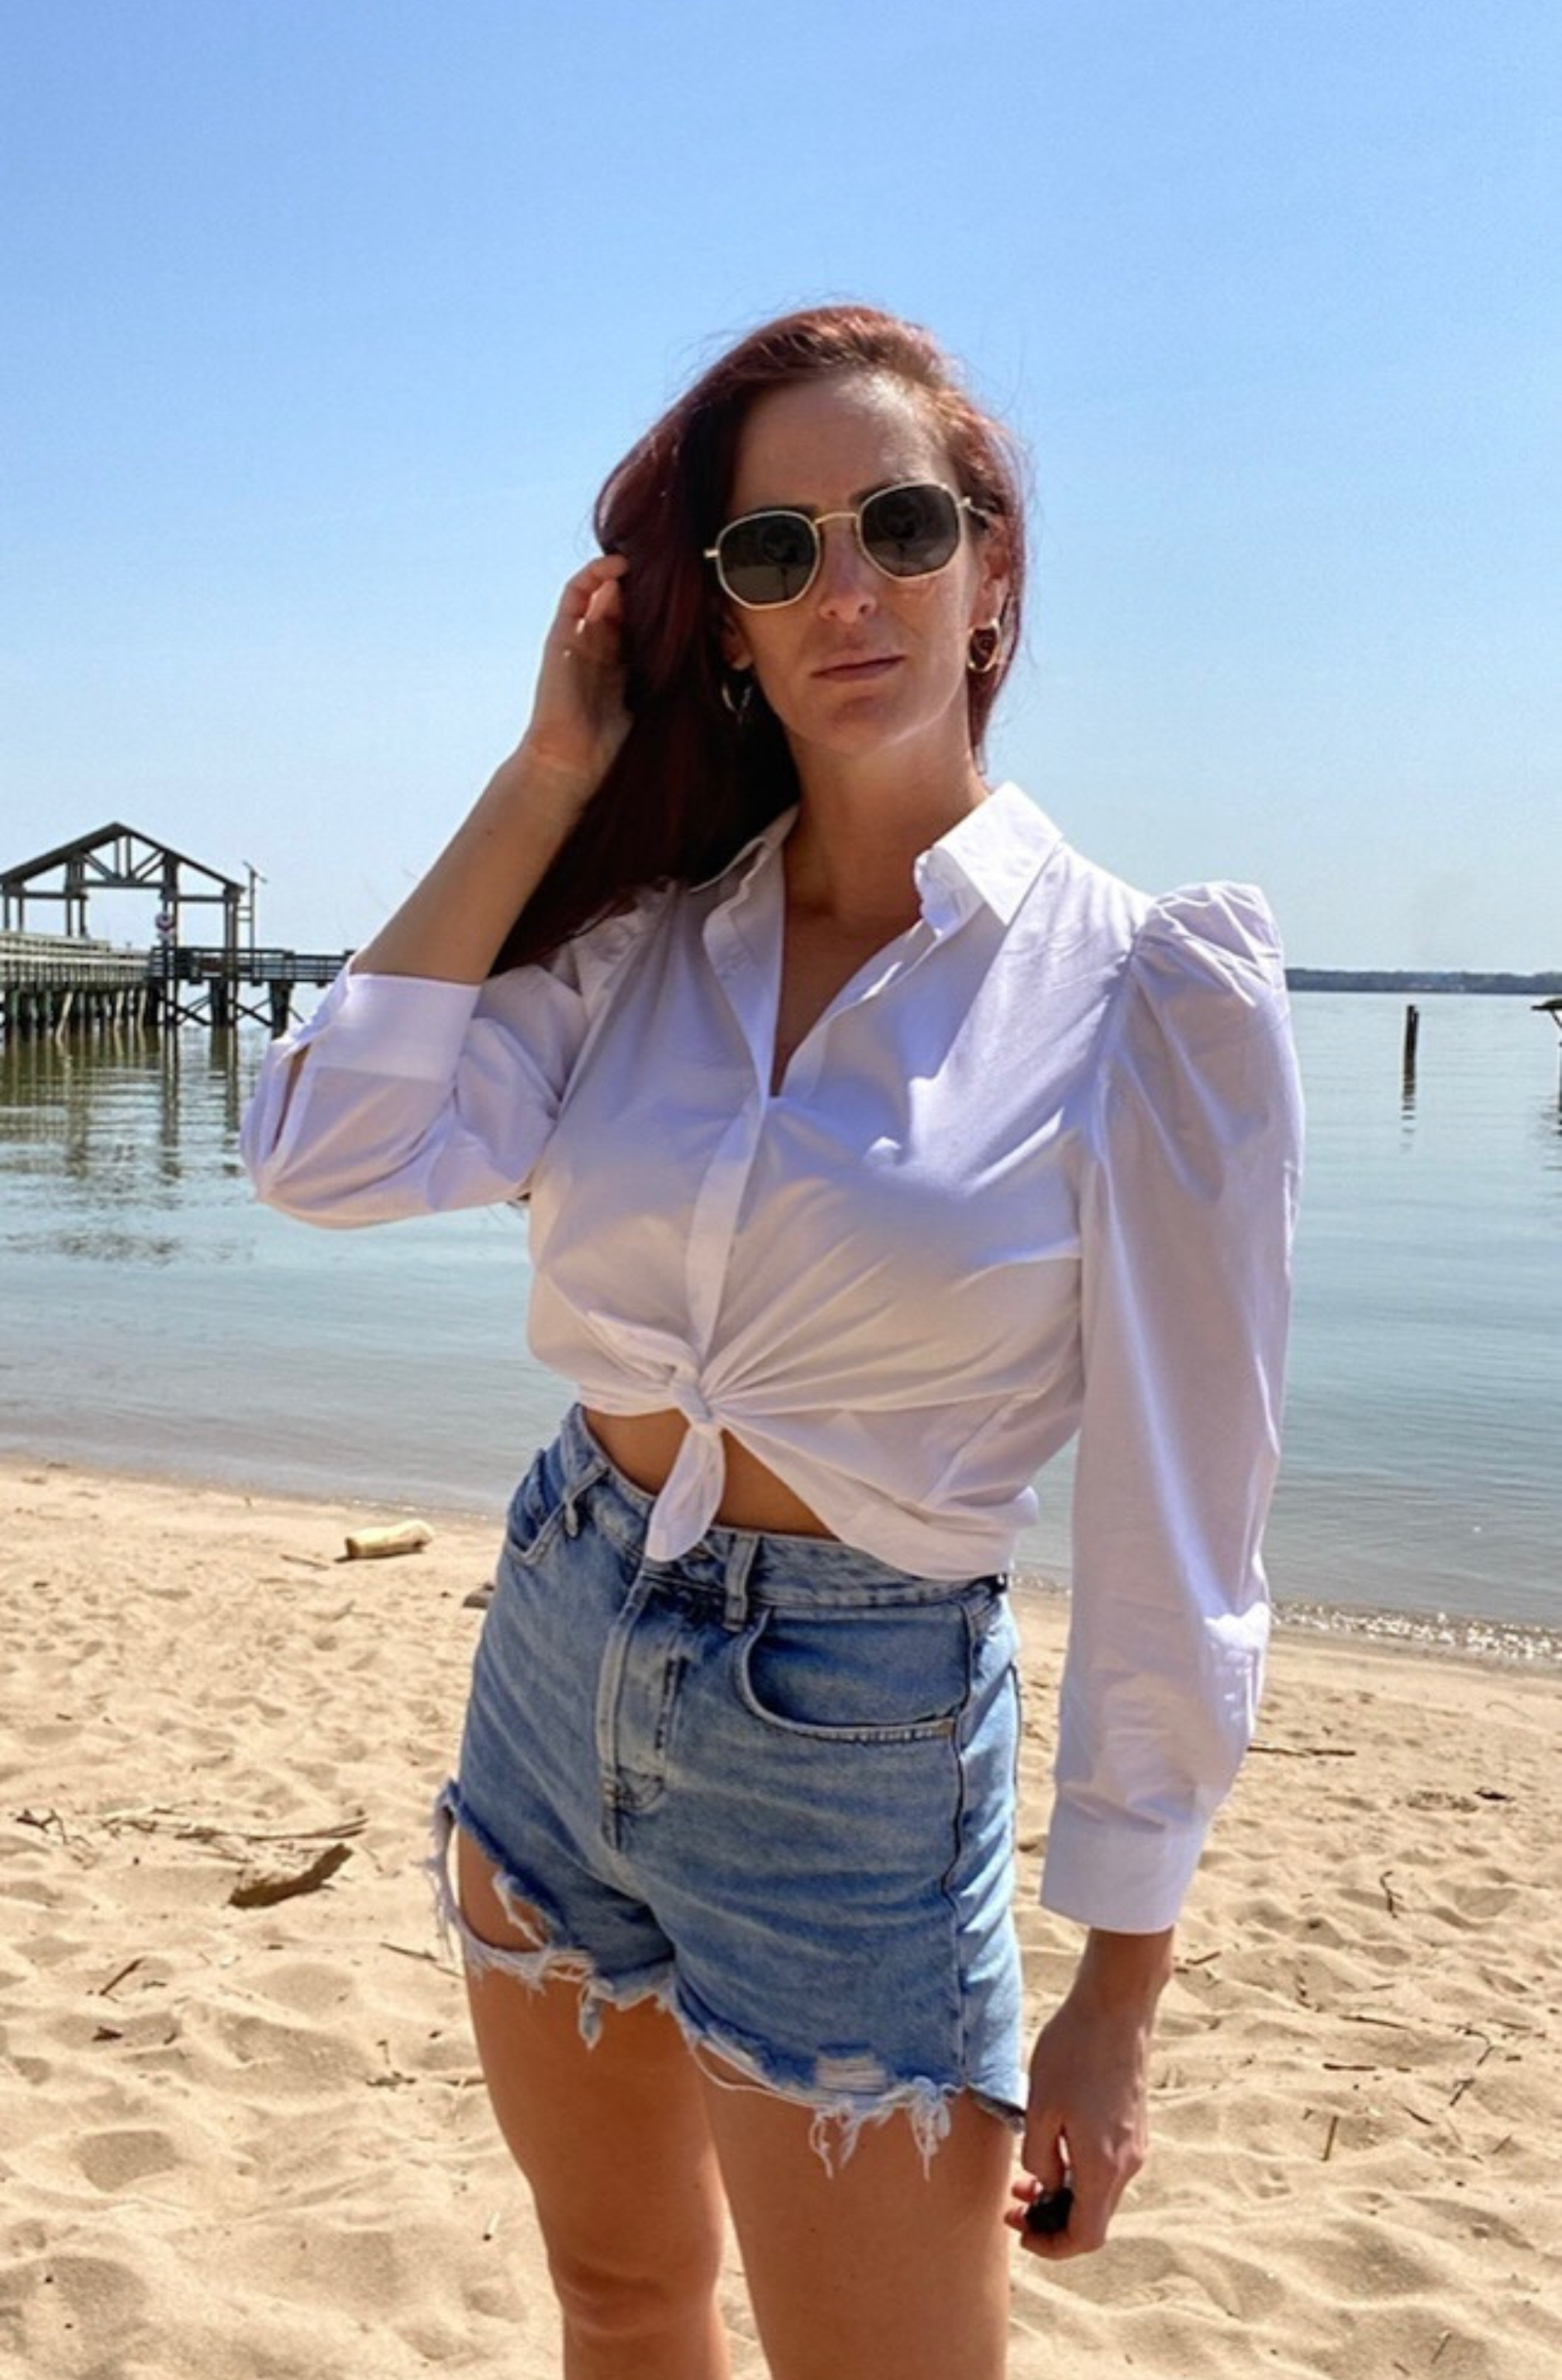 Fuller Bust Button Down Shirt Fit for D Cup Worn as a Cover Up At the Beach